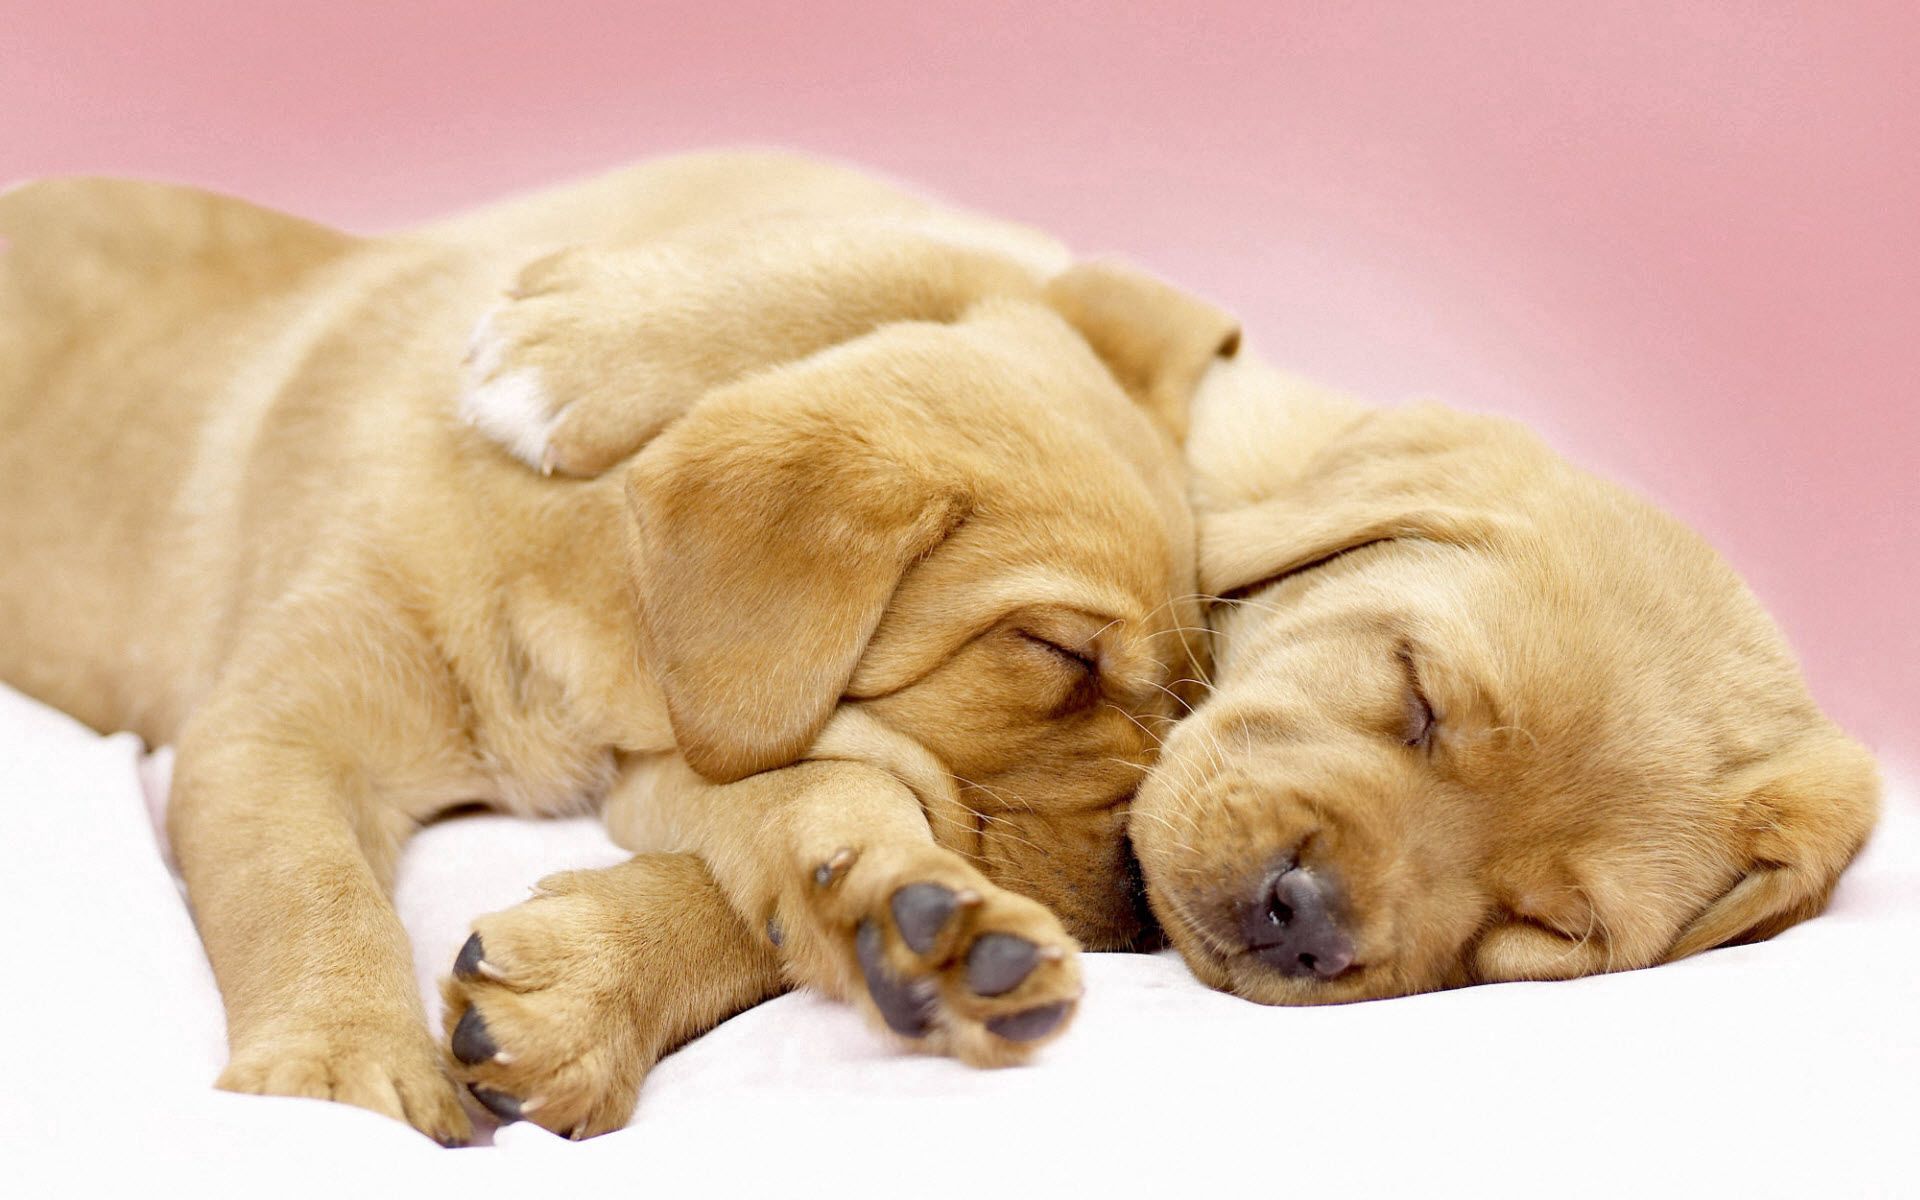 51940 Screensavers and Wallpapers Puppies for phone. Download animals, sleep, dream, labradors, puppies, cute pictures for free